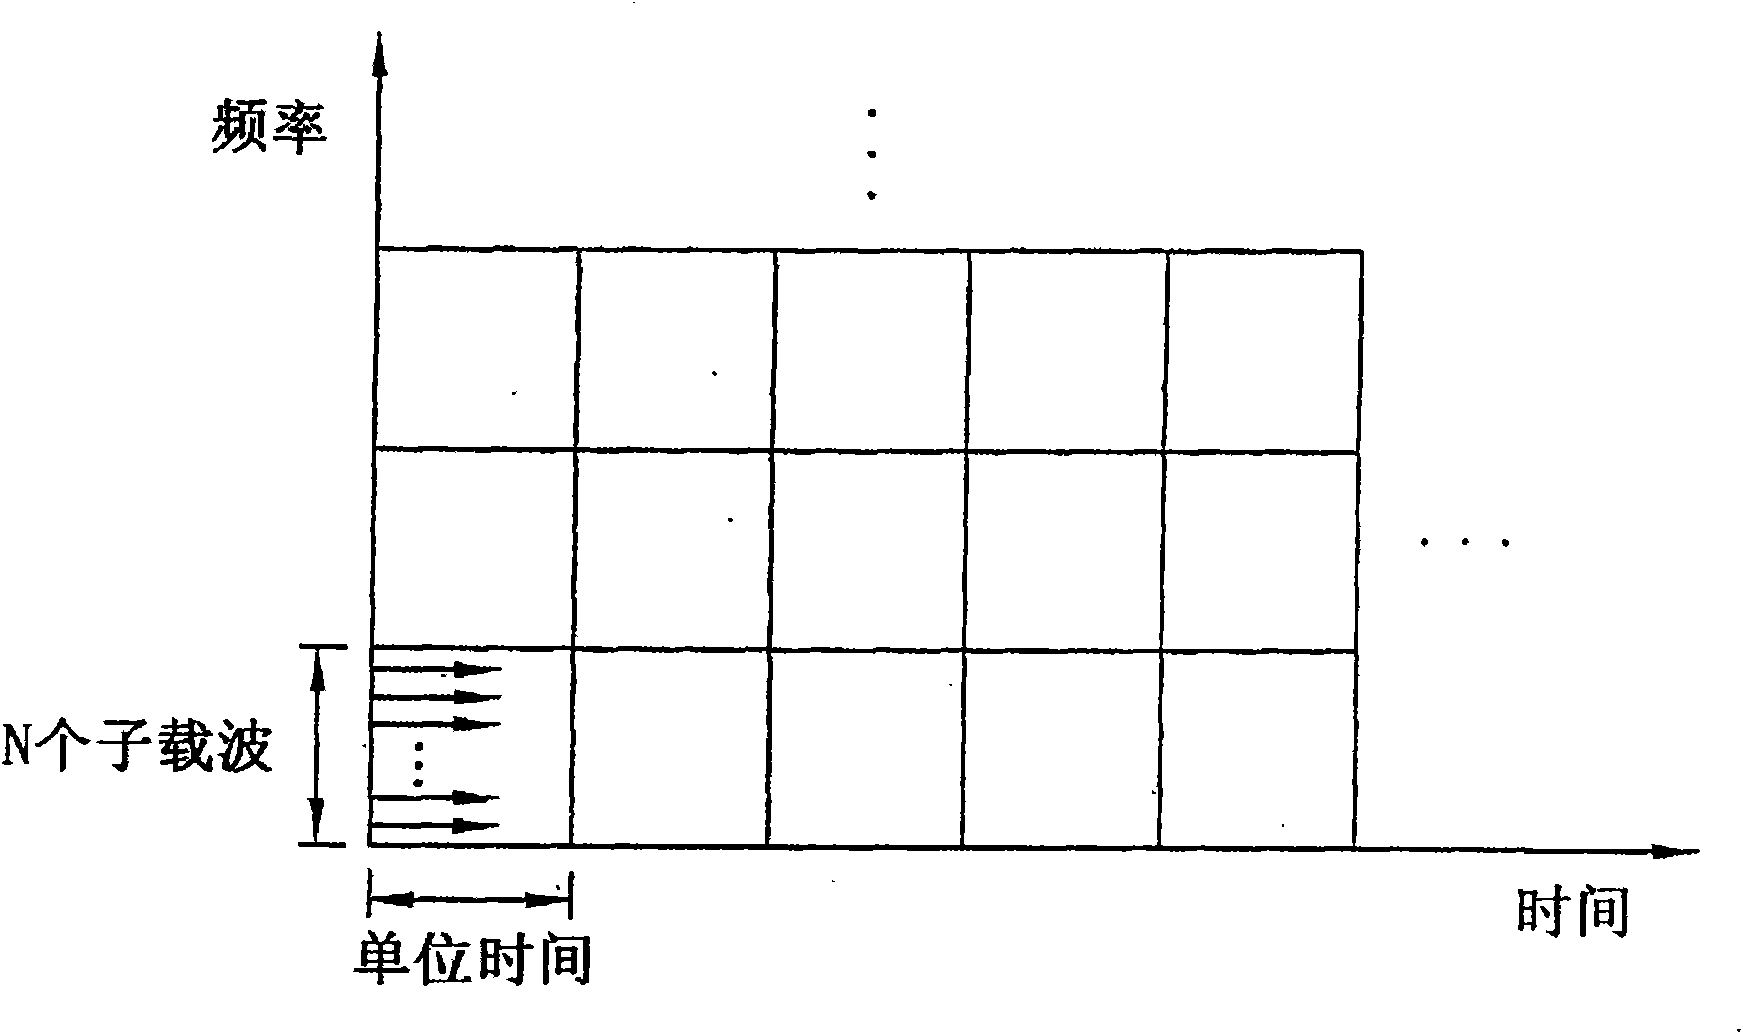 Method and device of retransmitting data in a mobile communication system